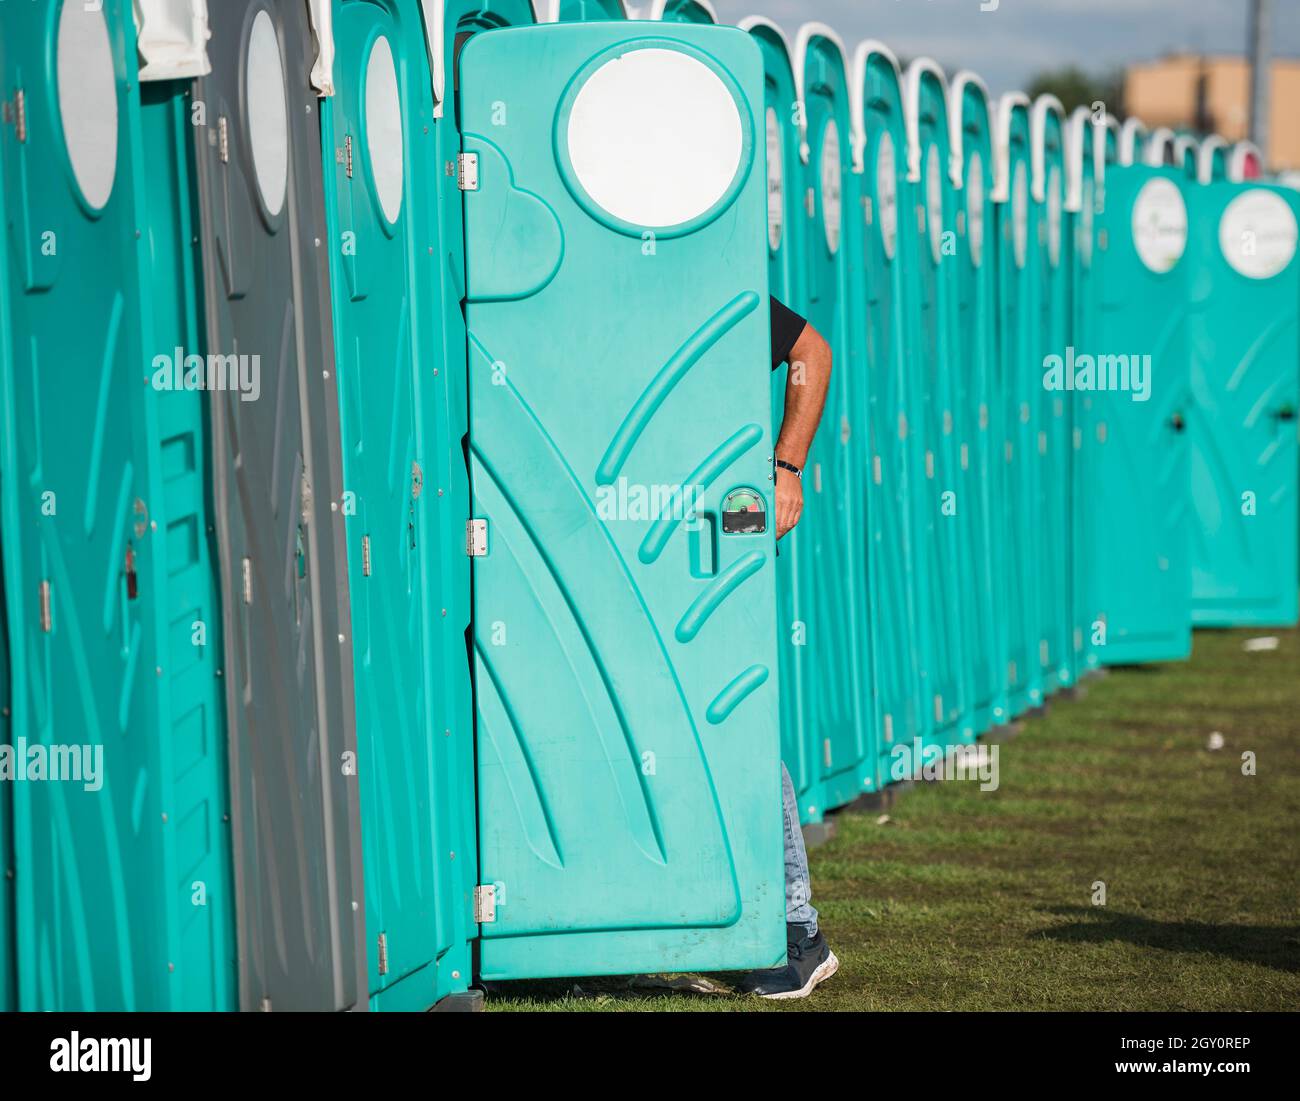 Lots of temporary toilets used during outdoor events Stock Photo